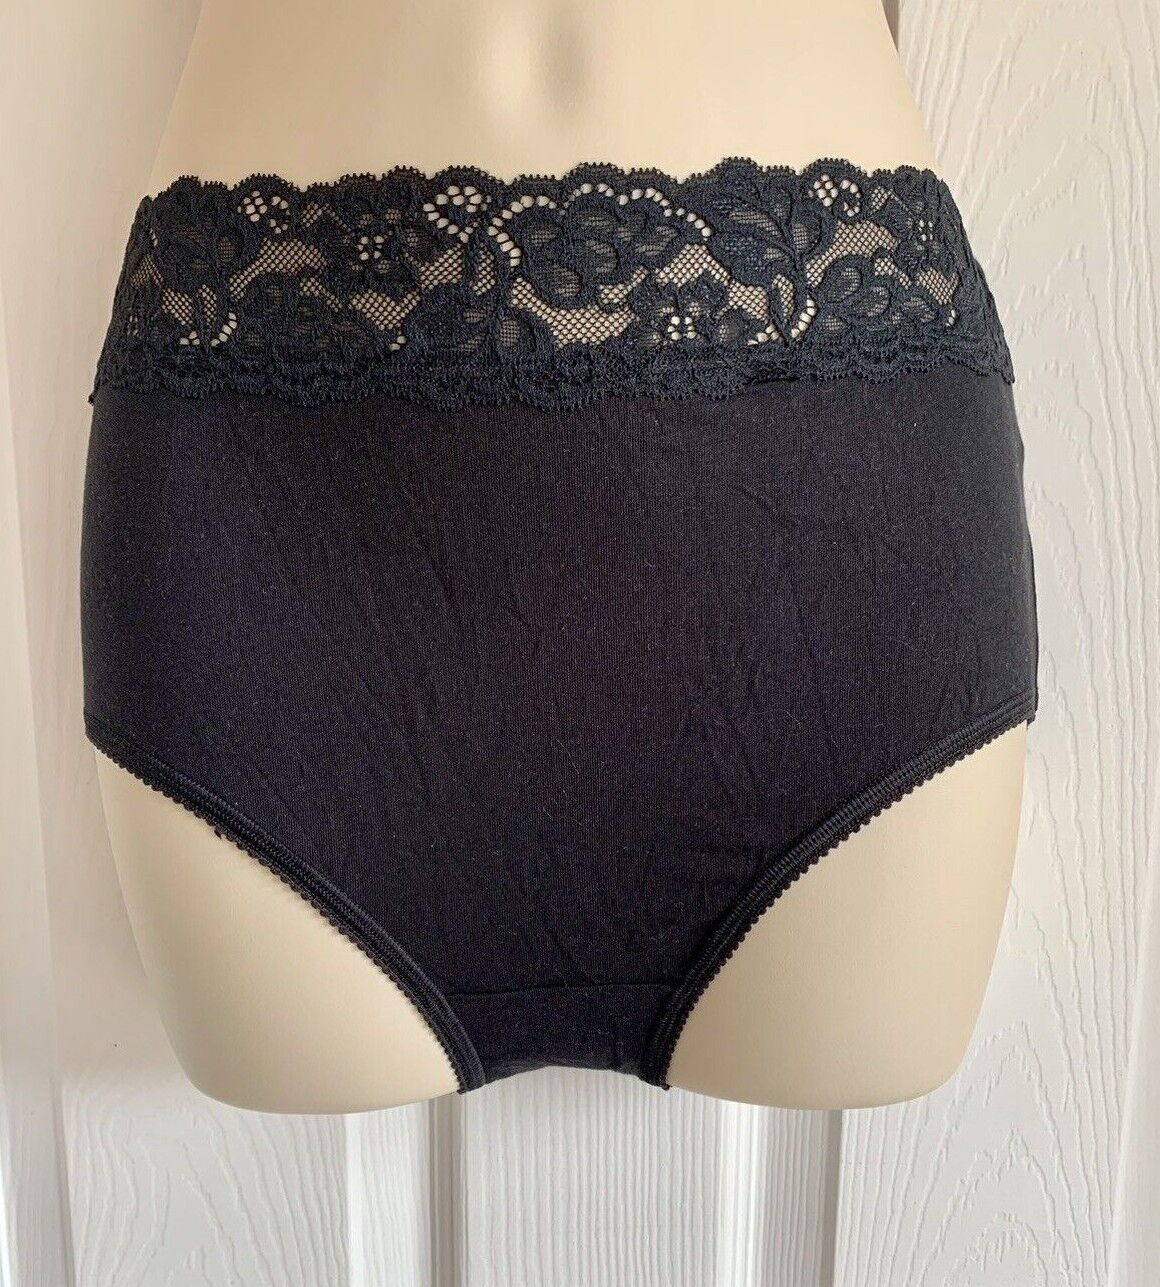 EX M*S Black Lace Waist High Rise Full Briefs in Sizes 10, 16, 18, 20